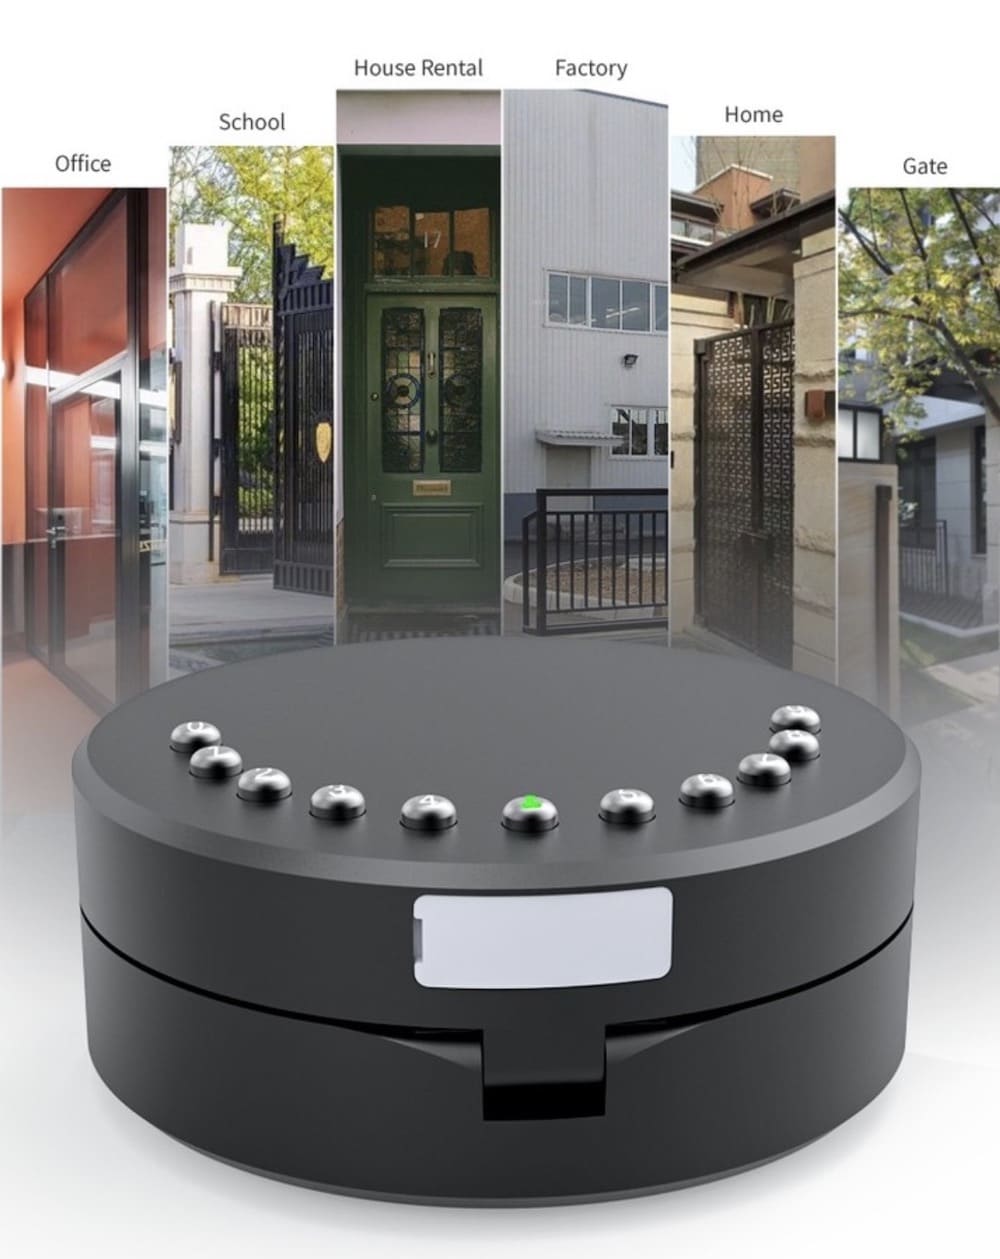 WiFi smart lock for key storing - support smartphone App + PIN code